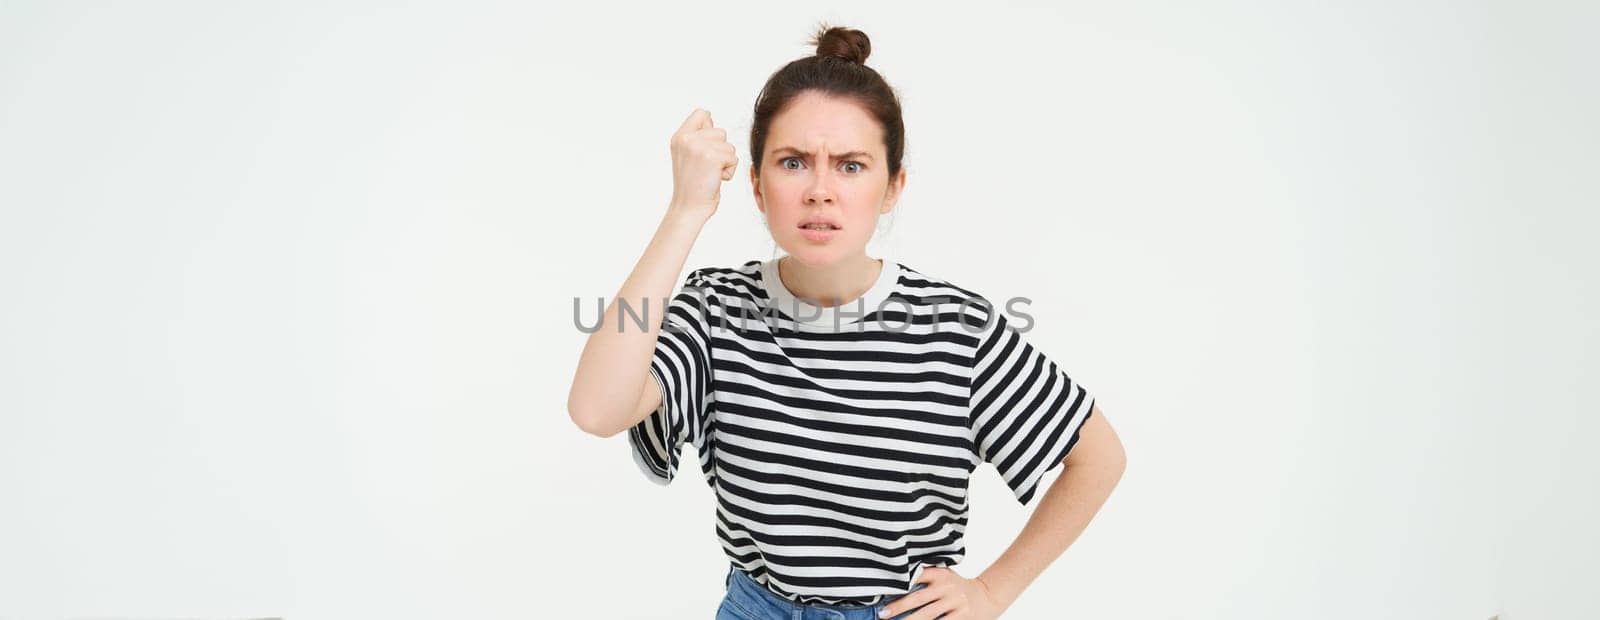 Image of angry woman threatening, shaking fist with disapproval, scolding someone, standing over white background.